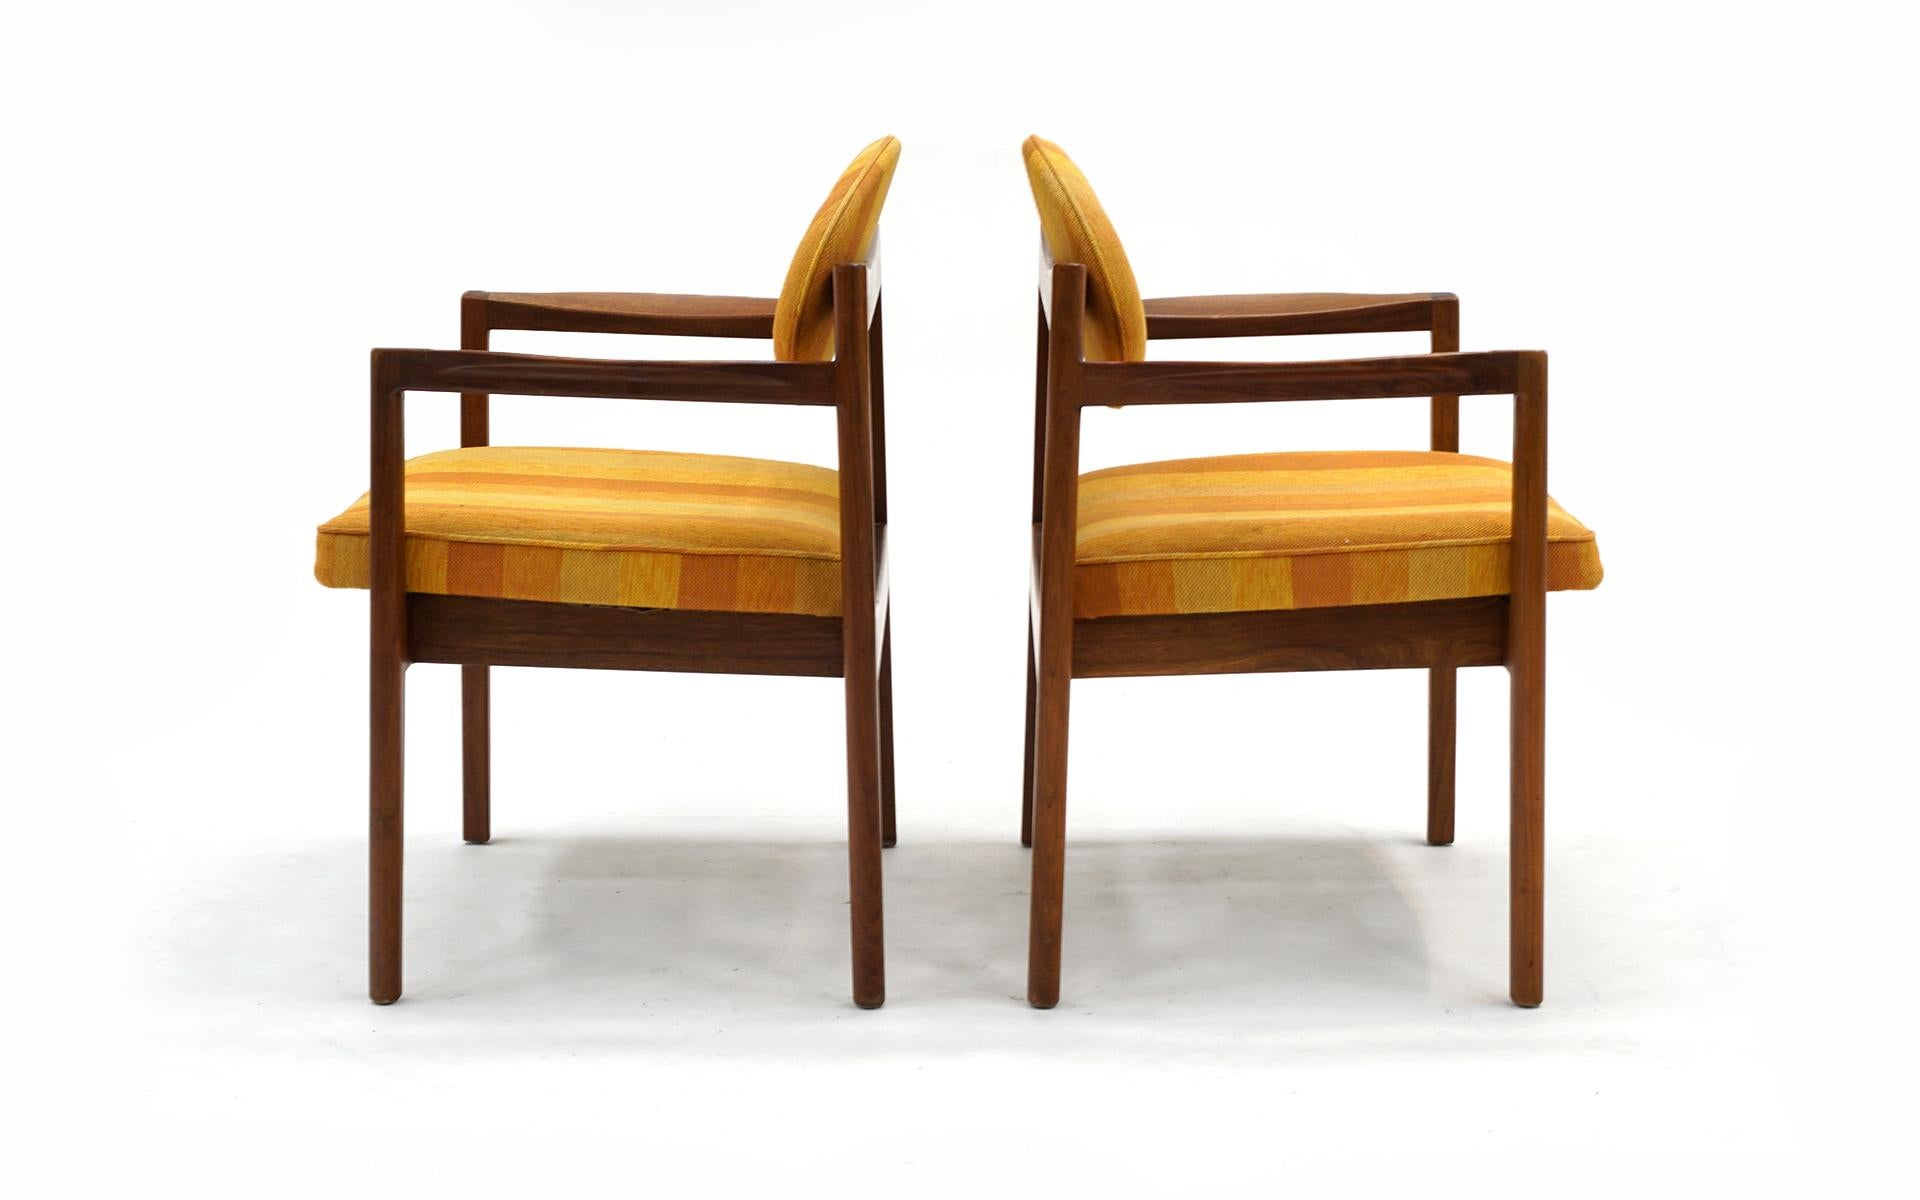 American Jens Risom Dining Chairs, Set of Four, Two Arm and Two Side Chairs, Walnut